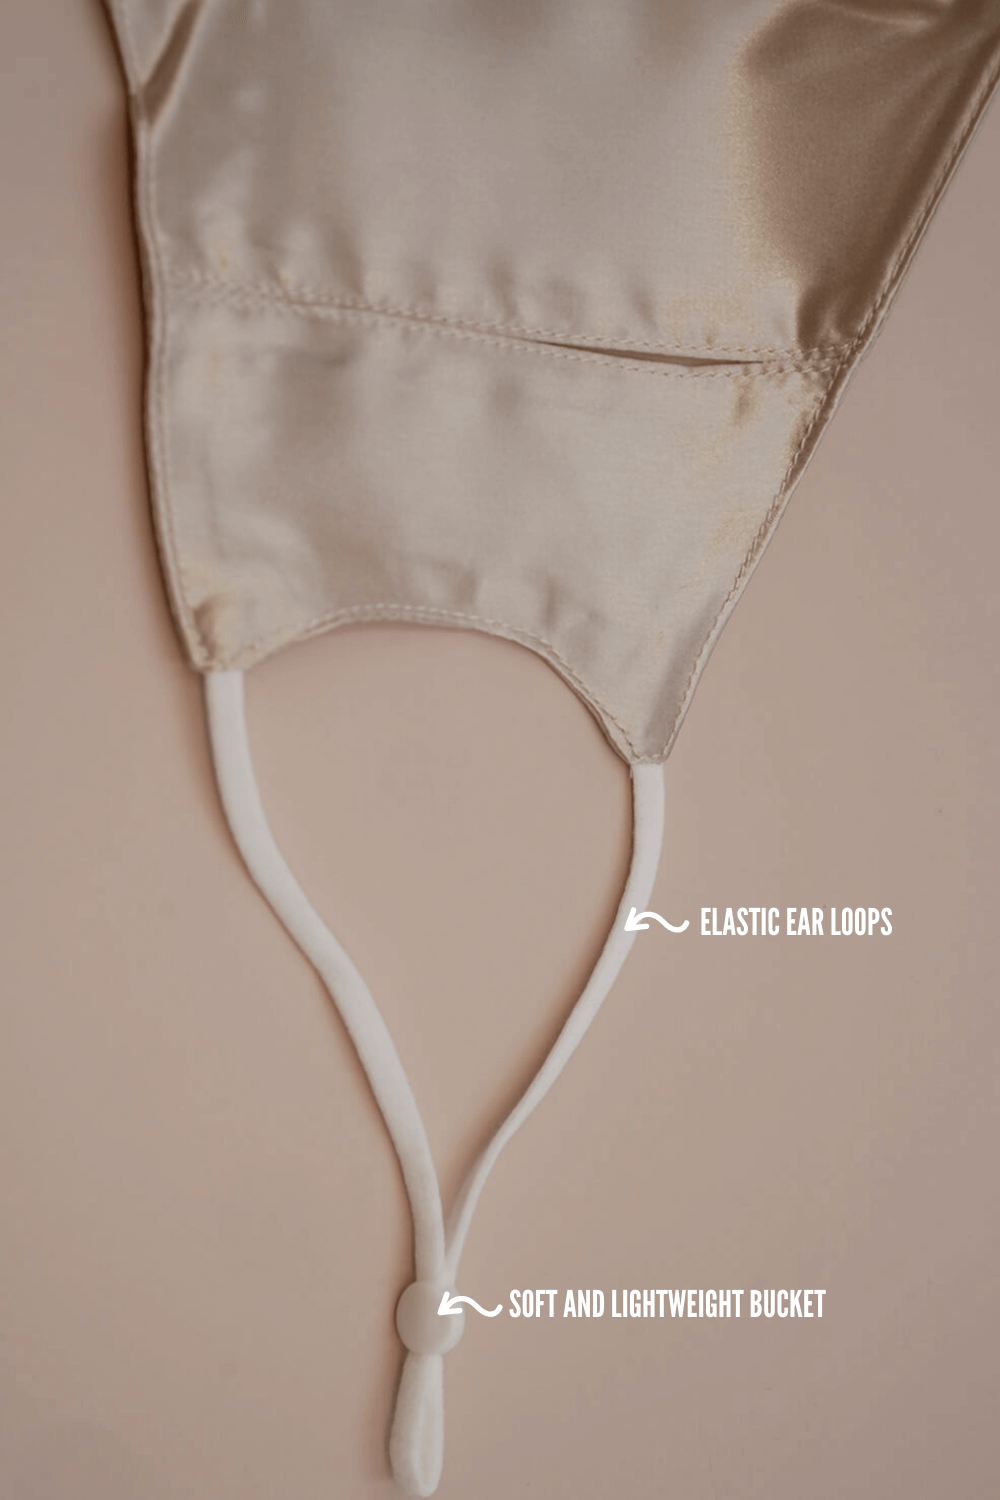 STELLAR Silk Face Mask - Rose Gold (with Nose Wire and Filter Pocket) - BASK ™